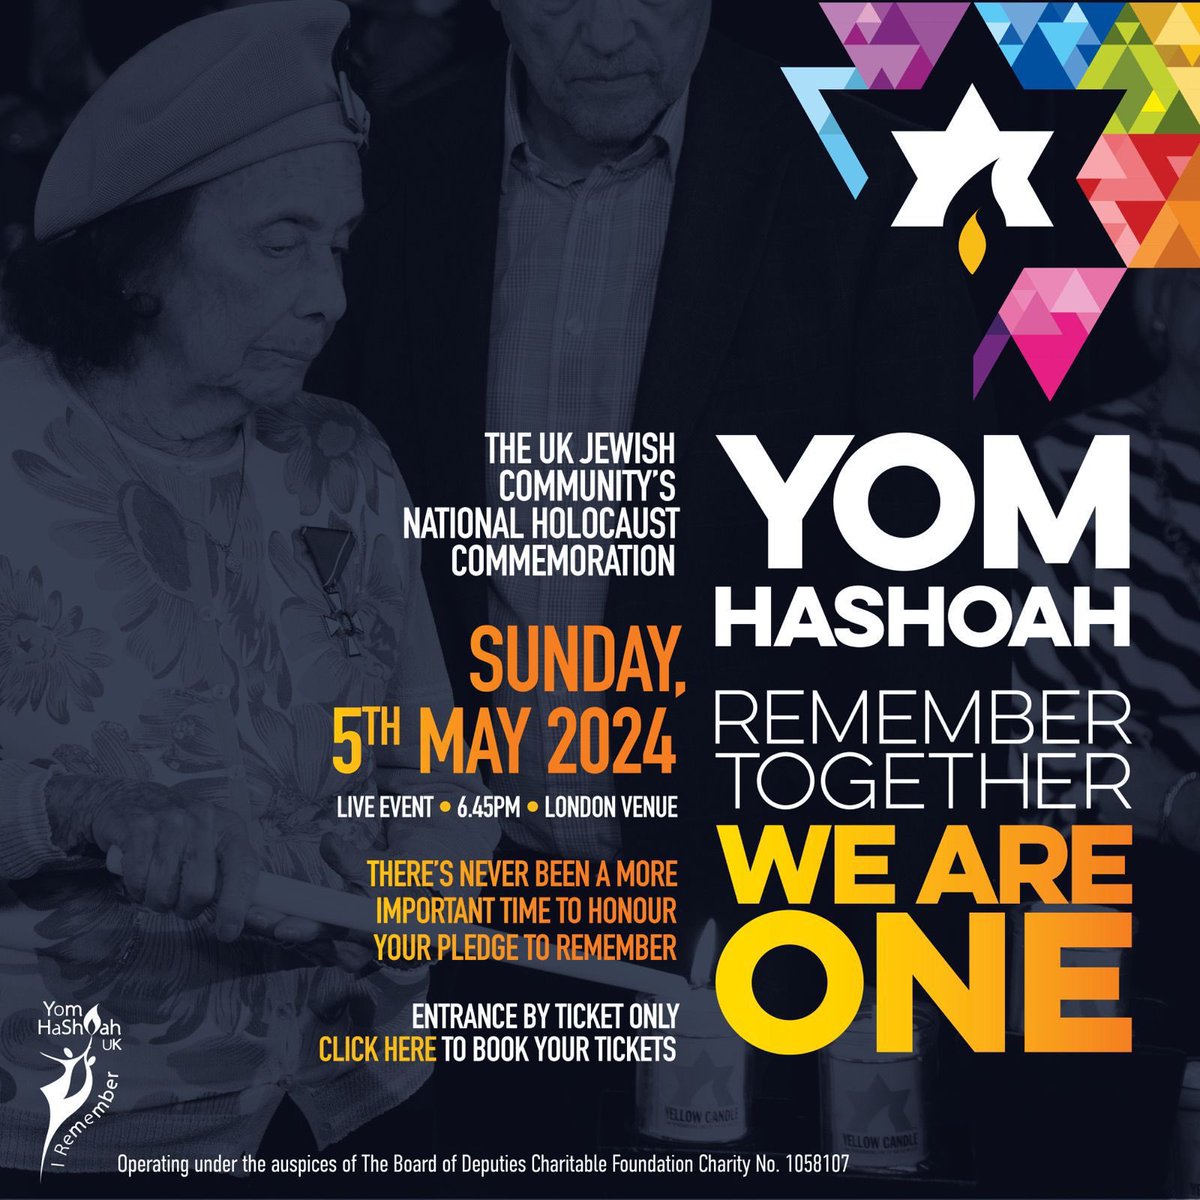 ONE WEEK TO GO! 1,400 TICKETS ALREADY BOOKED. PLEASE SHARE: Join us on Sun 5th May at 6.45pm for the #YomHaShoah National UK Holocaust Commemoration. *Prestigious Heart of London Location TBA Book your FREE tickets now at: YomHaShoah.org.uk